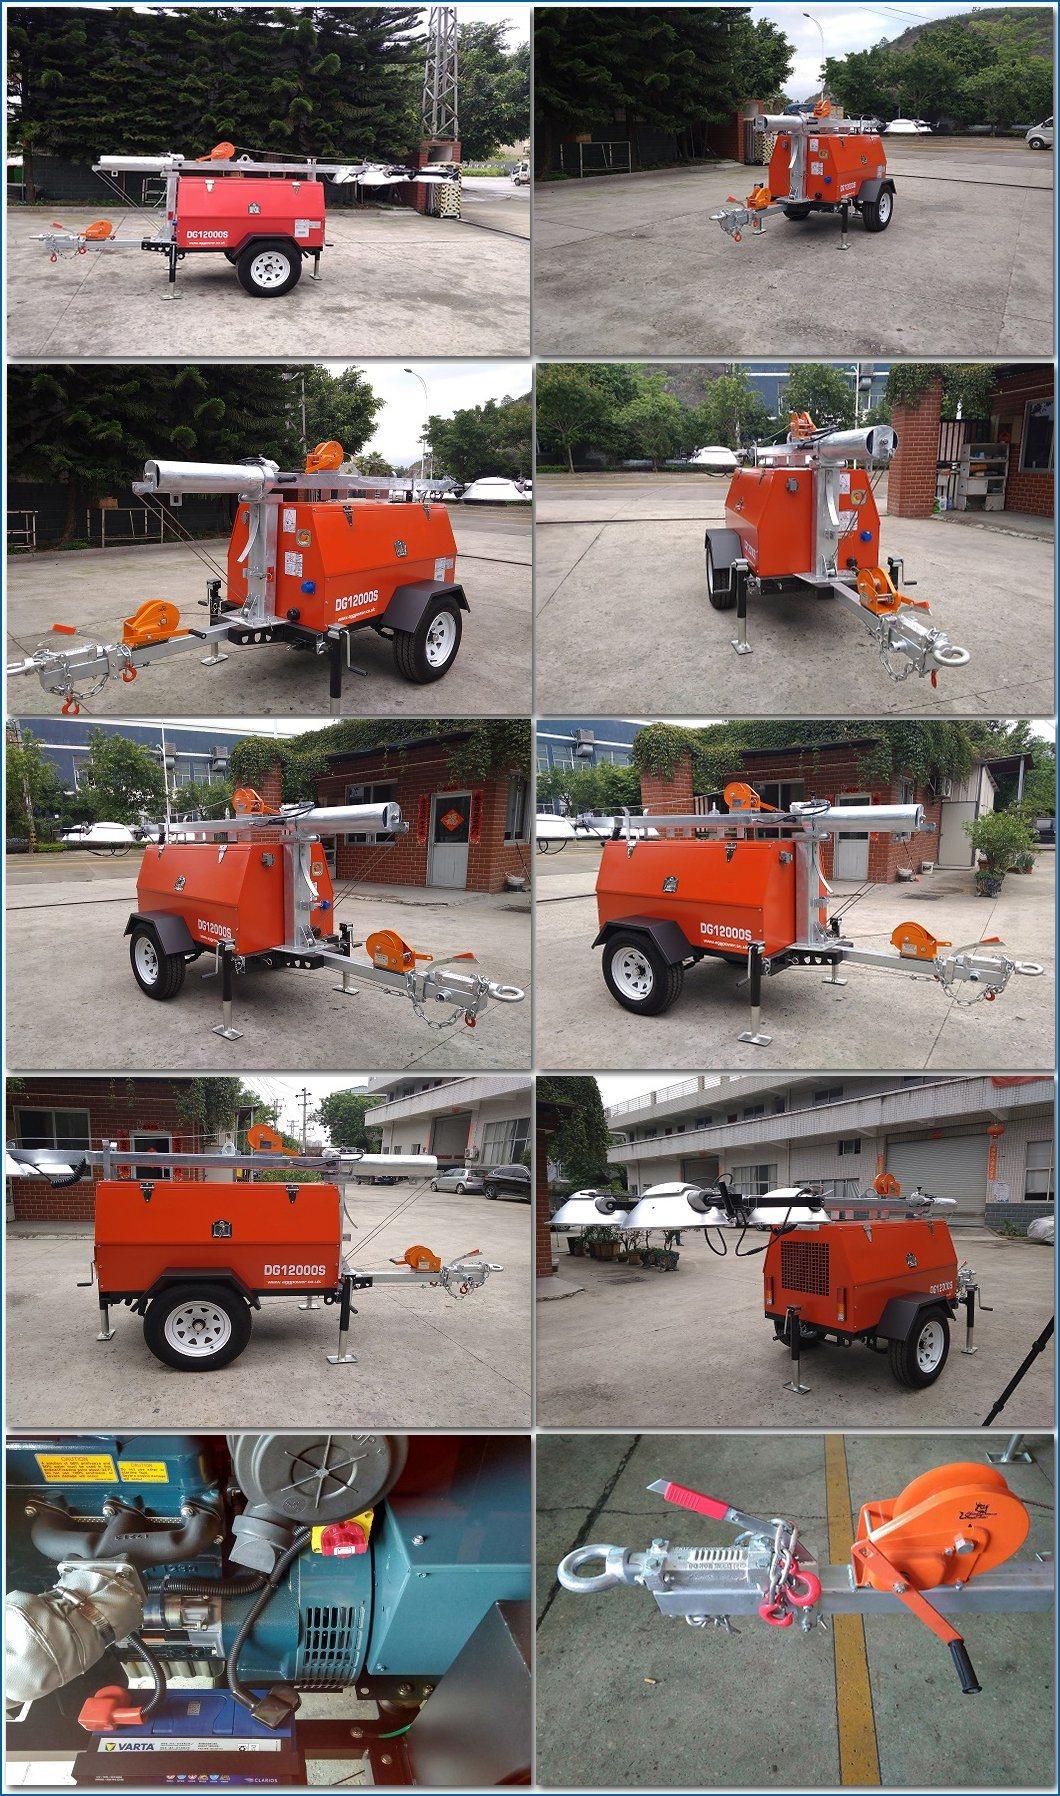 Trailer-Mounted Yanmar Engine Portable Mobile Light Tower for Rescue and Emergency